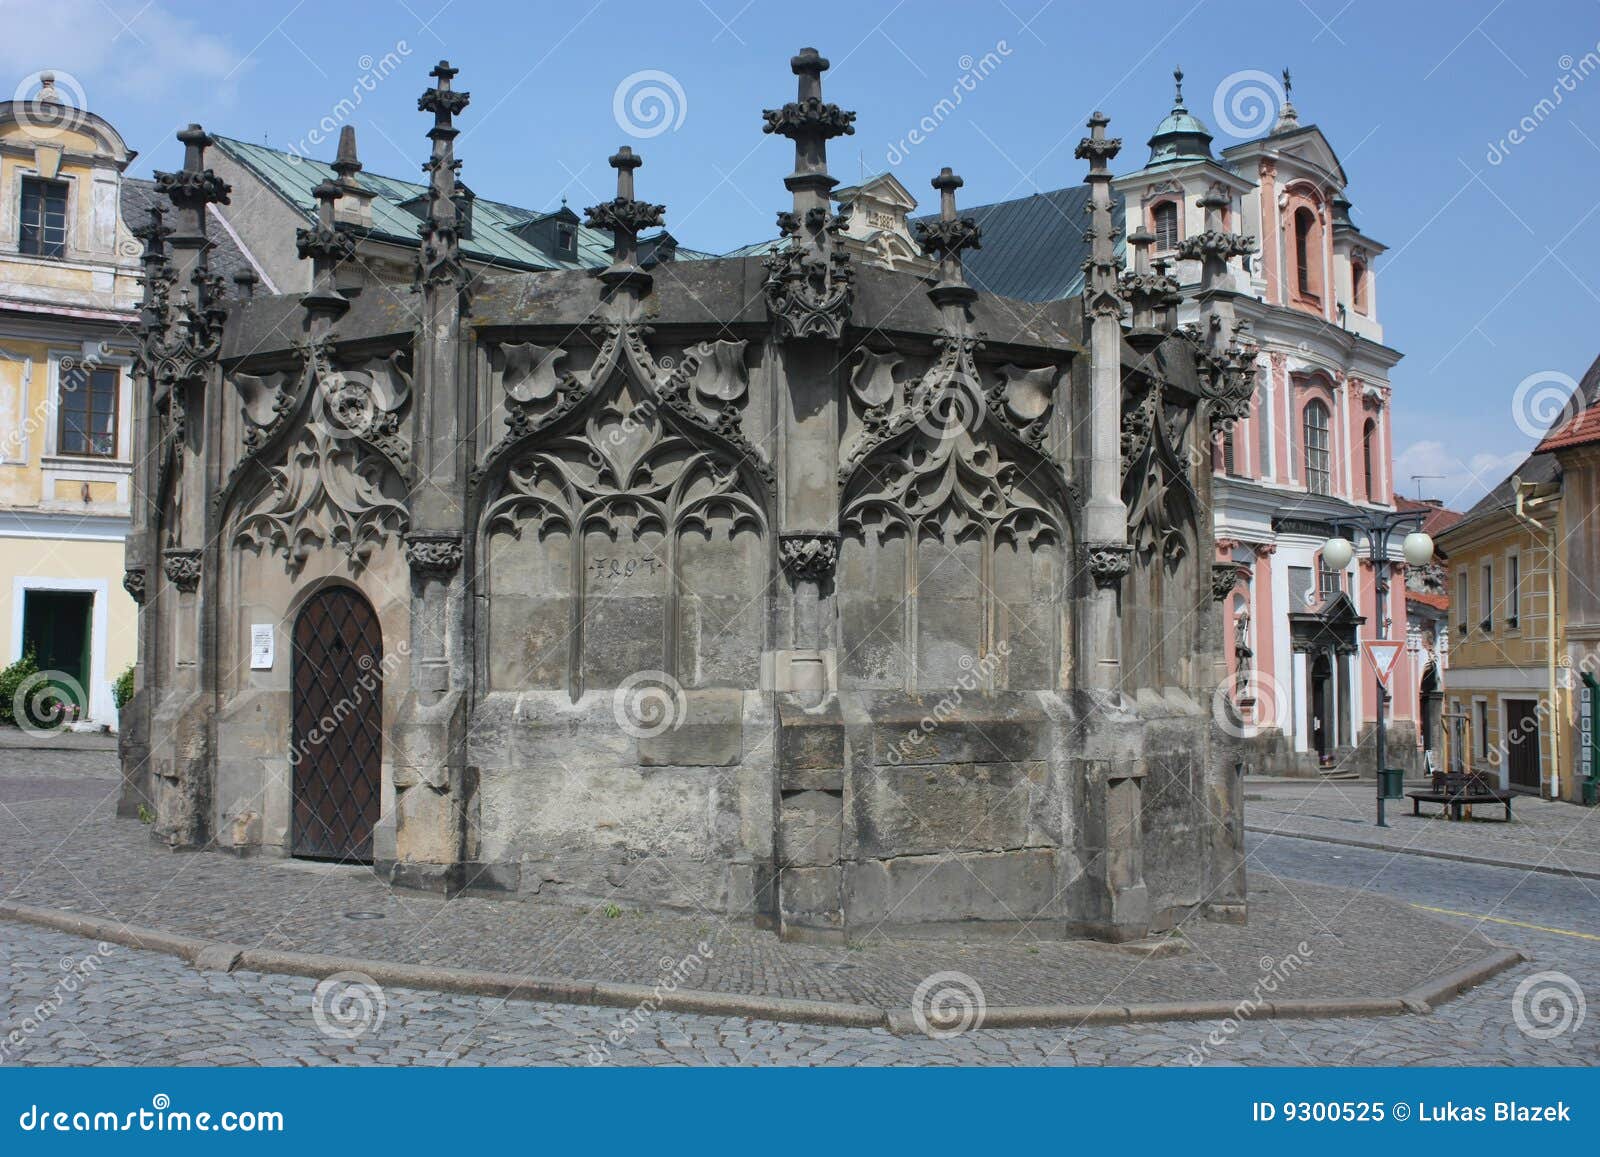 gothic stone fountain in kutna hora